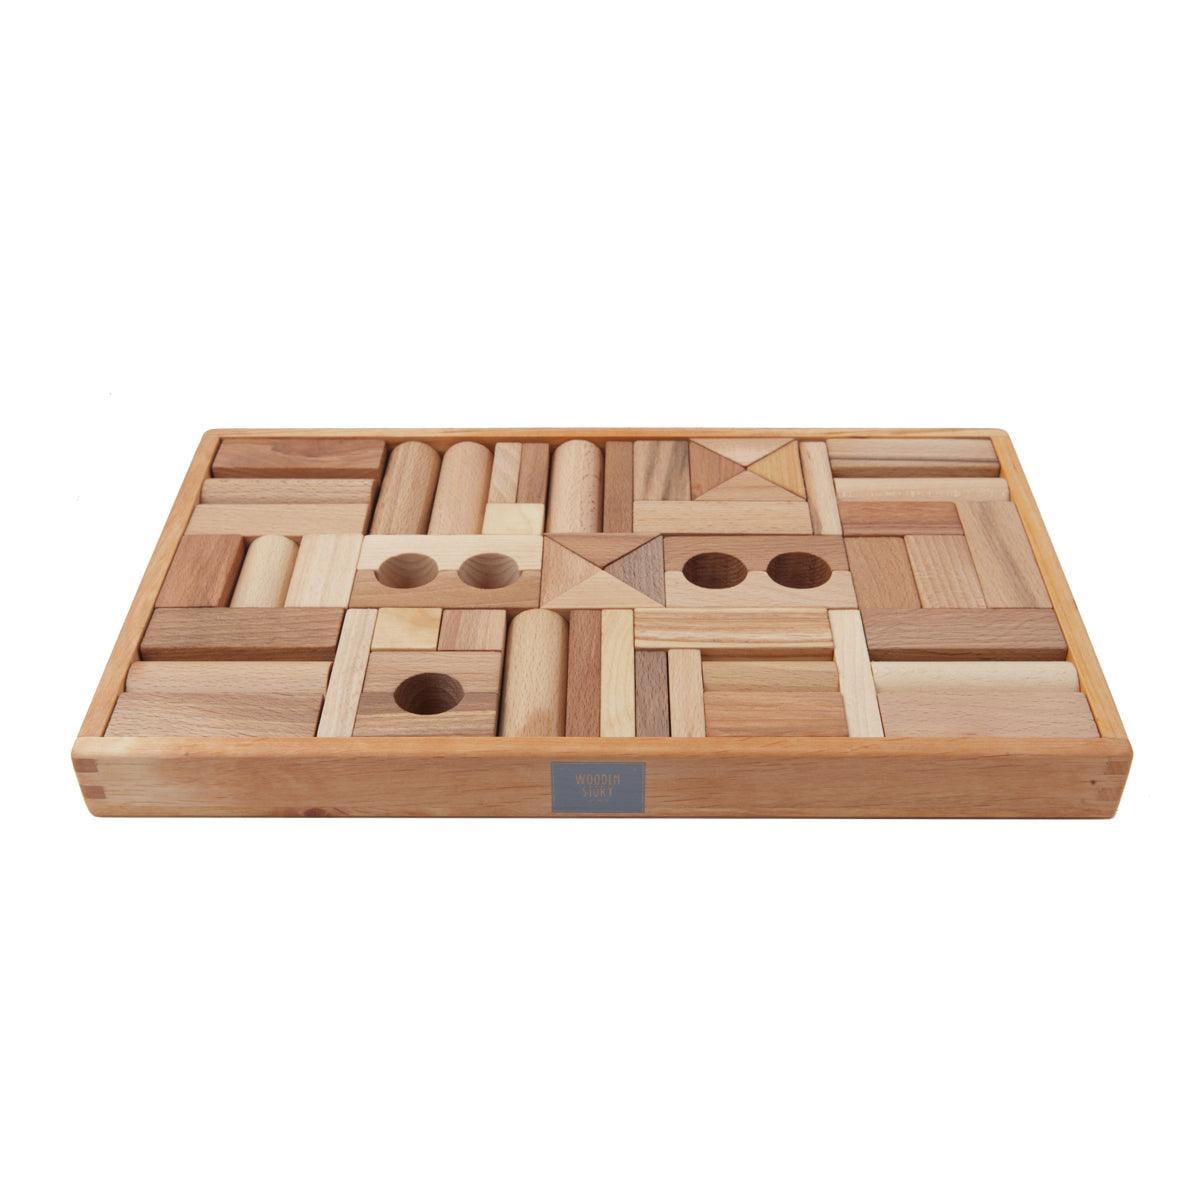 Natural blocks in tray - 54 pcs - Why and Whale